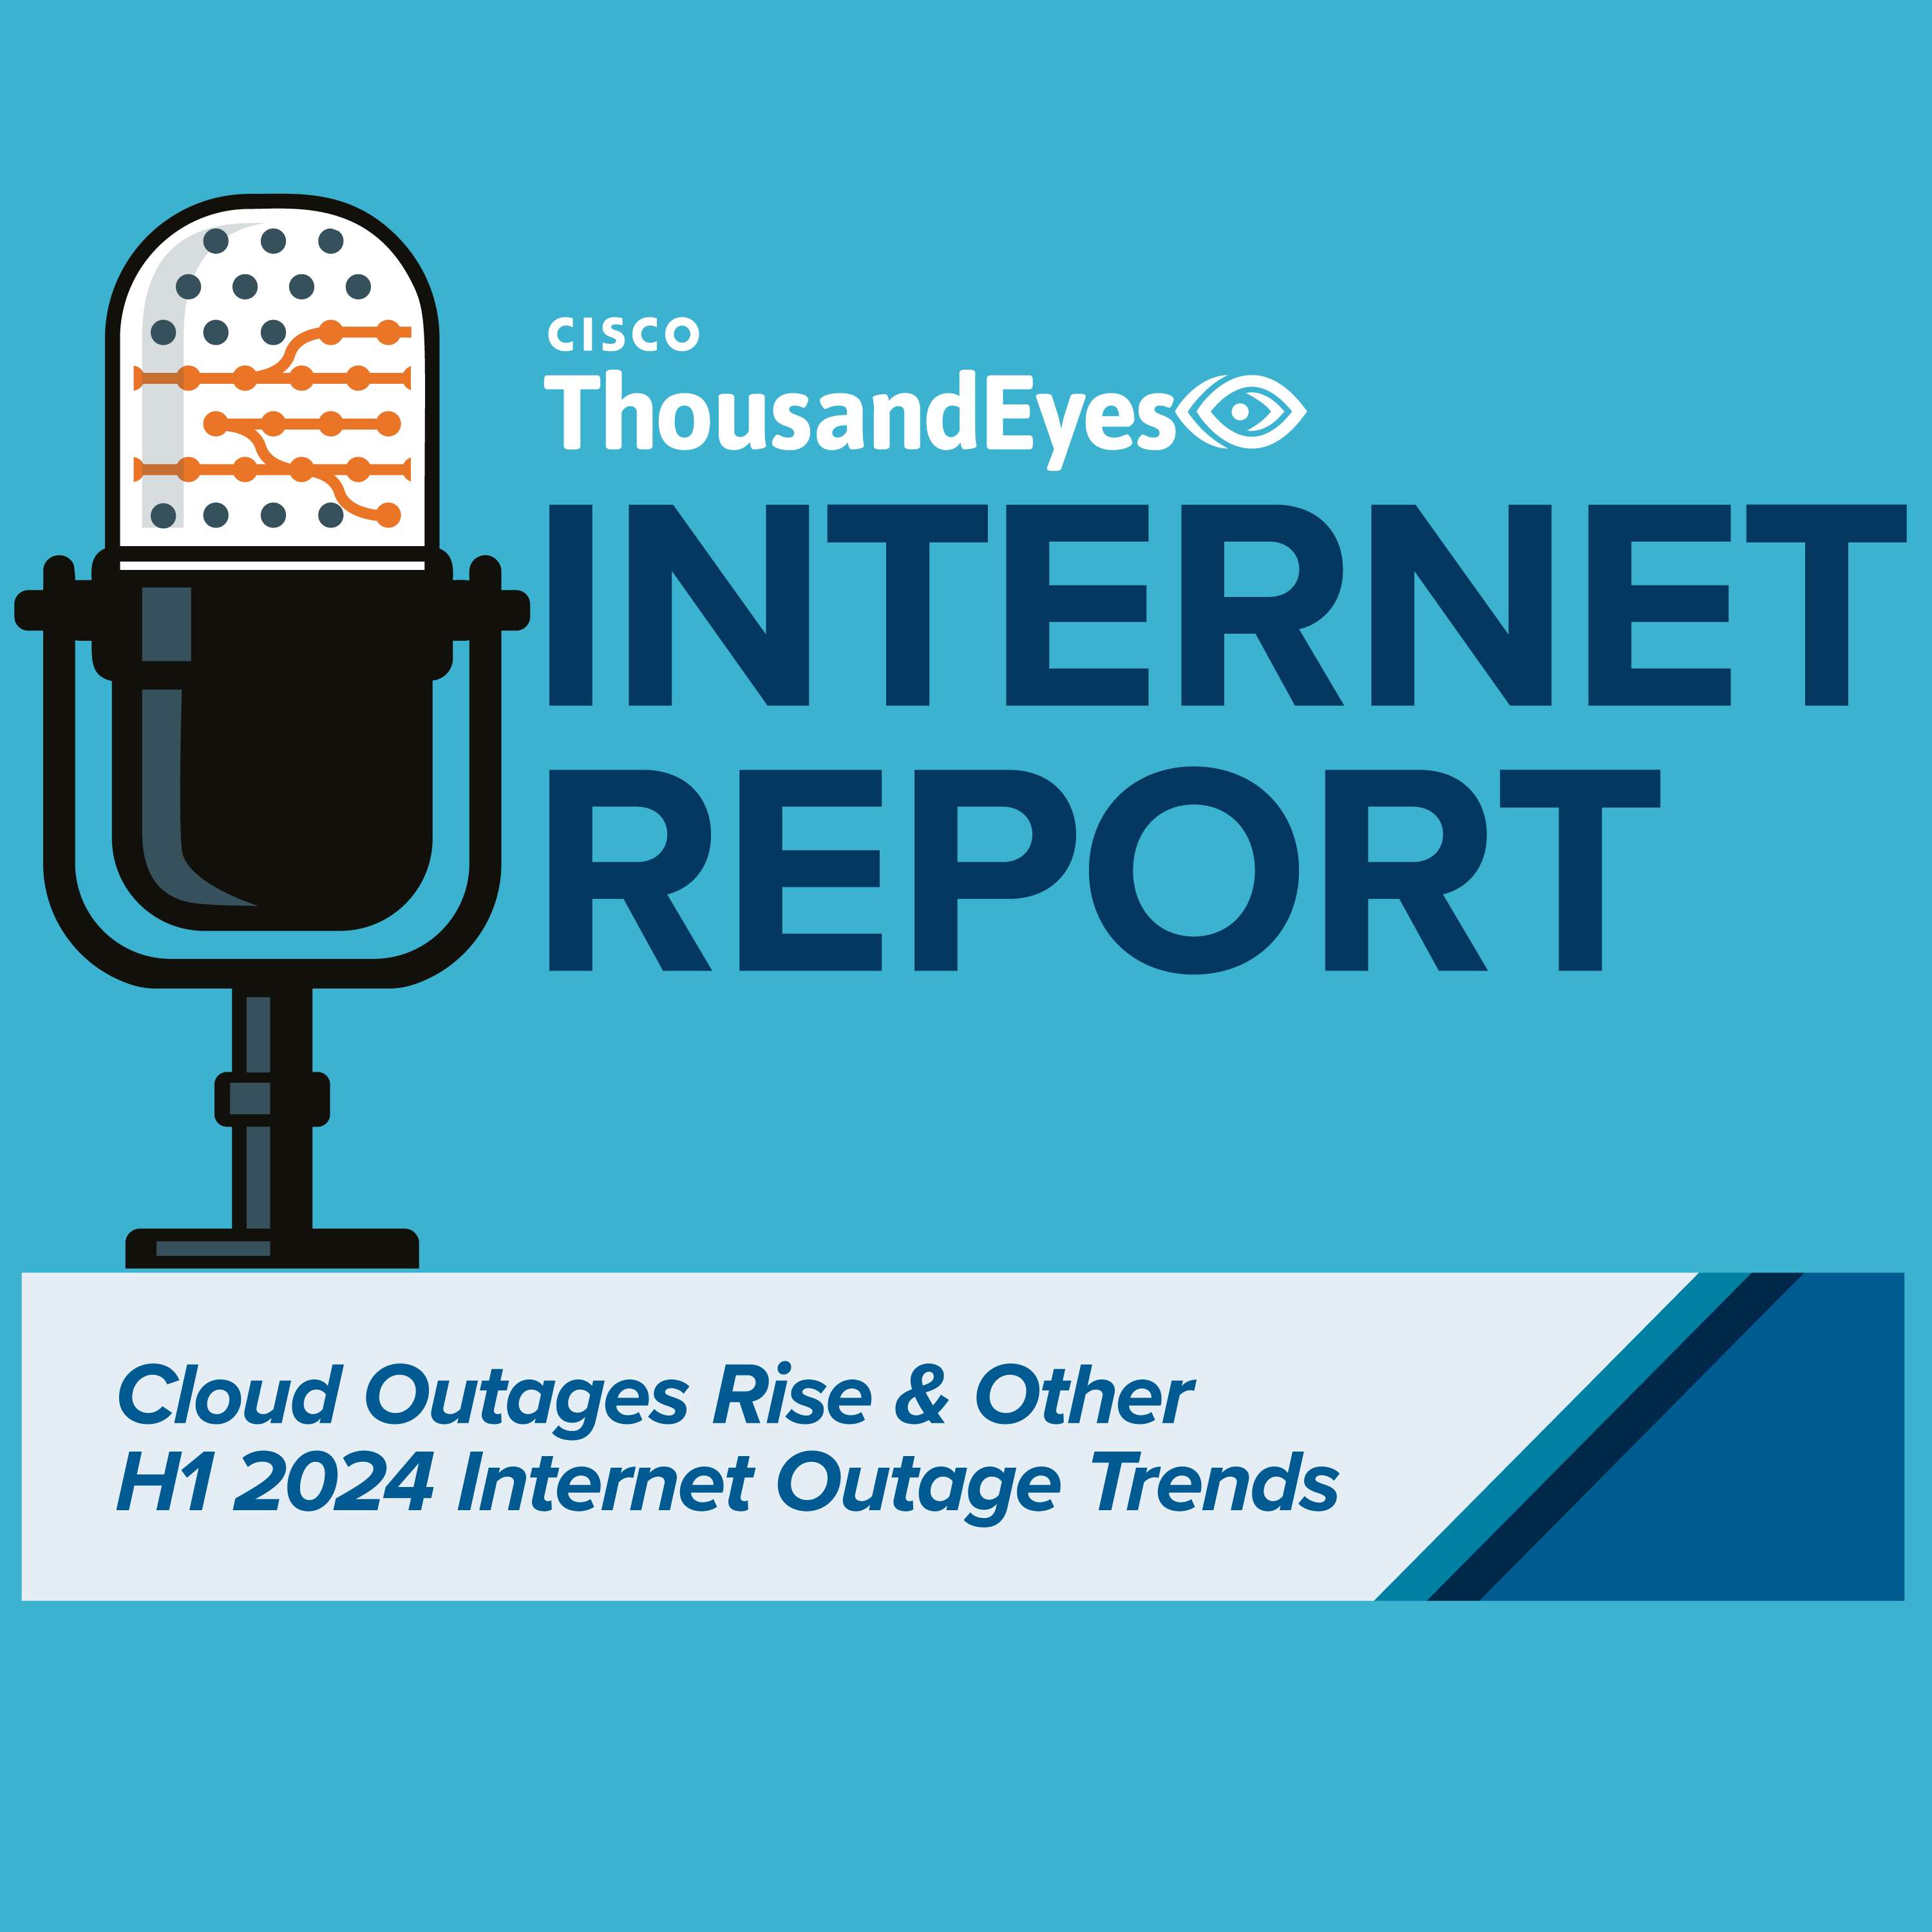 Cloud Outages Rise & Other H1 2024 Internet Outage Trends